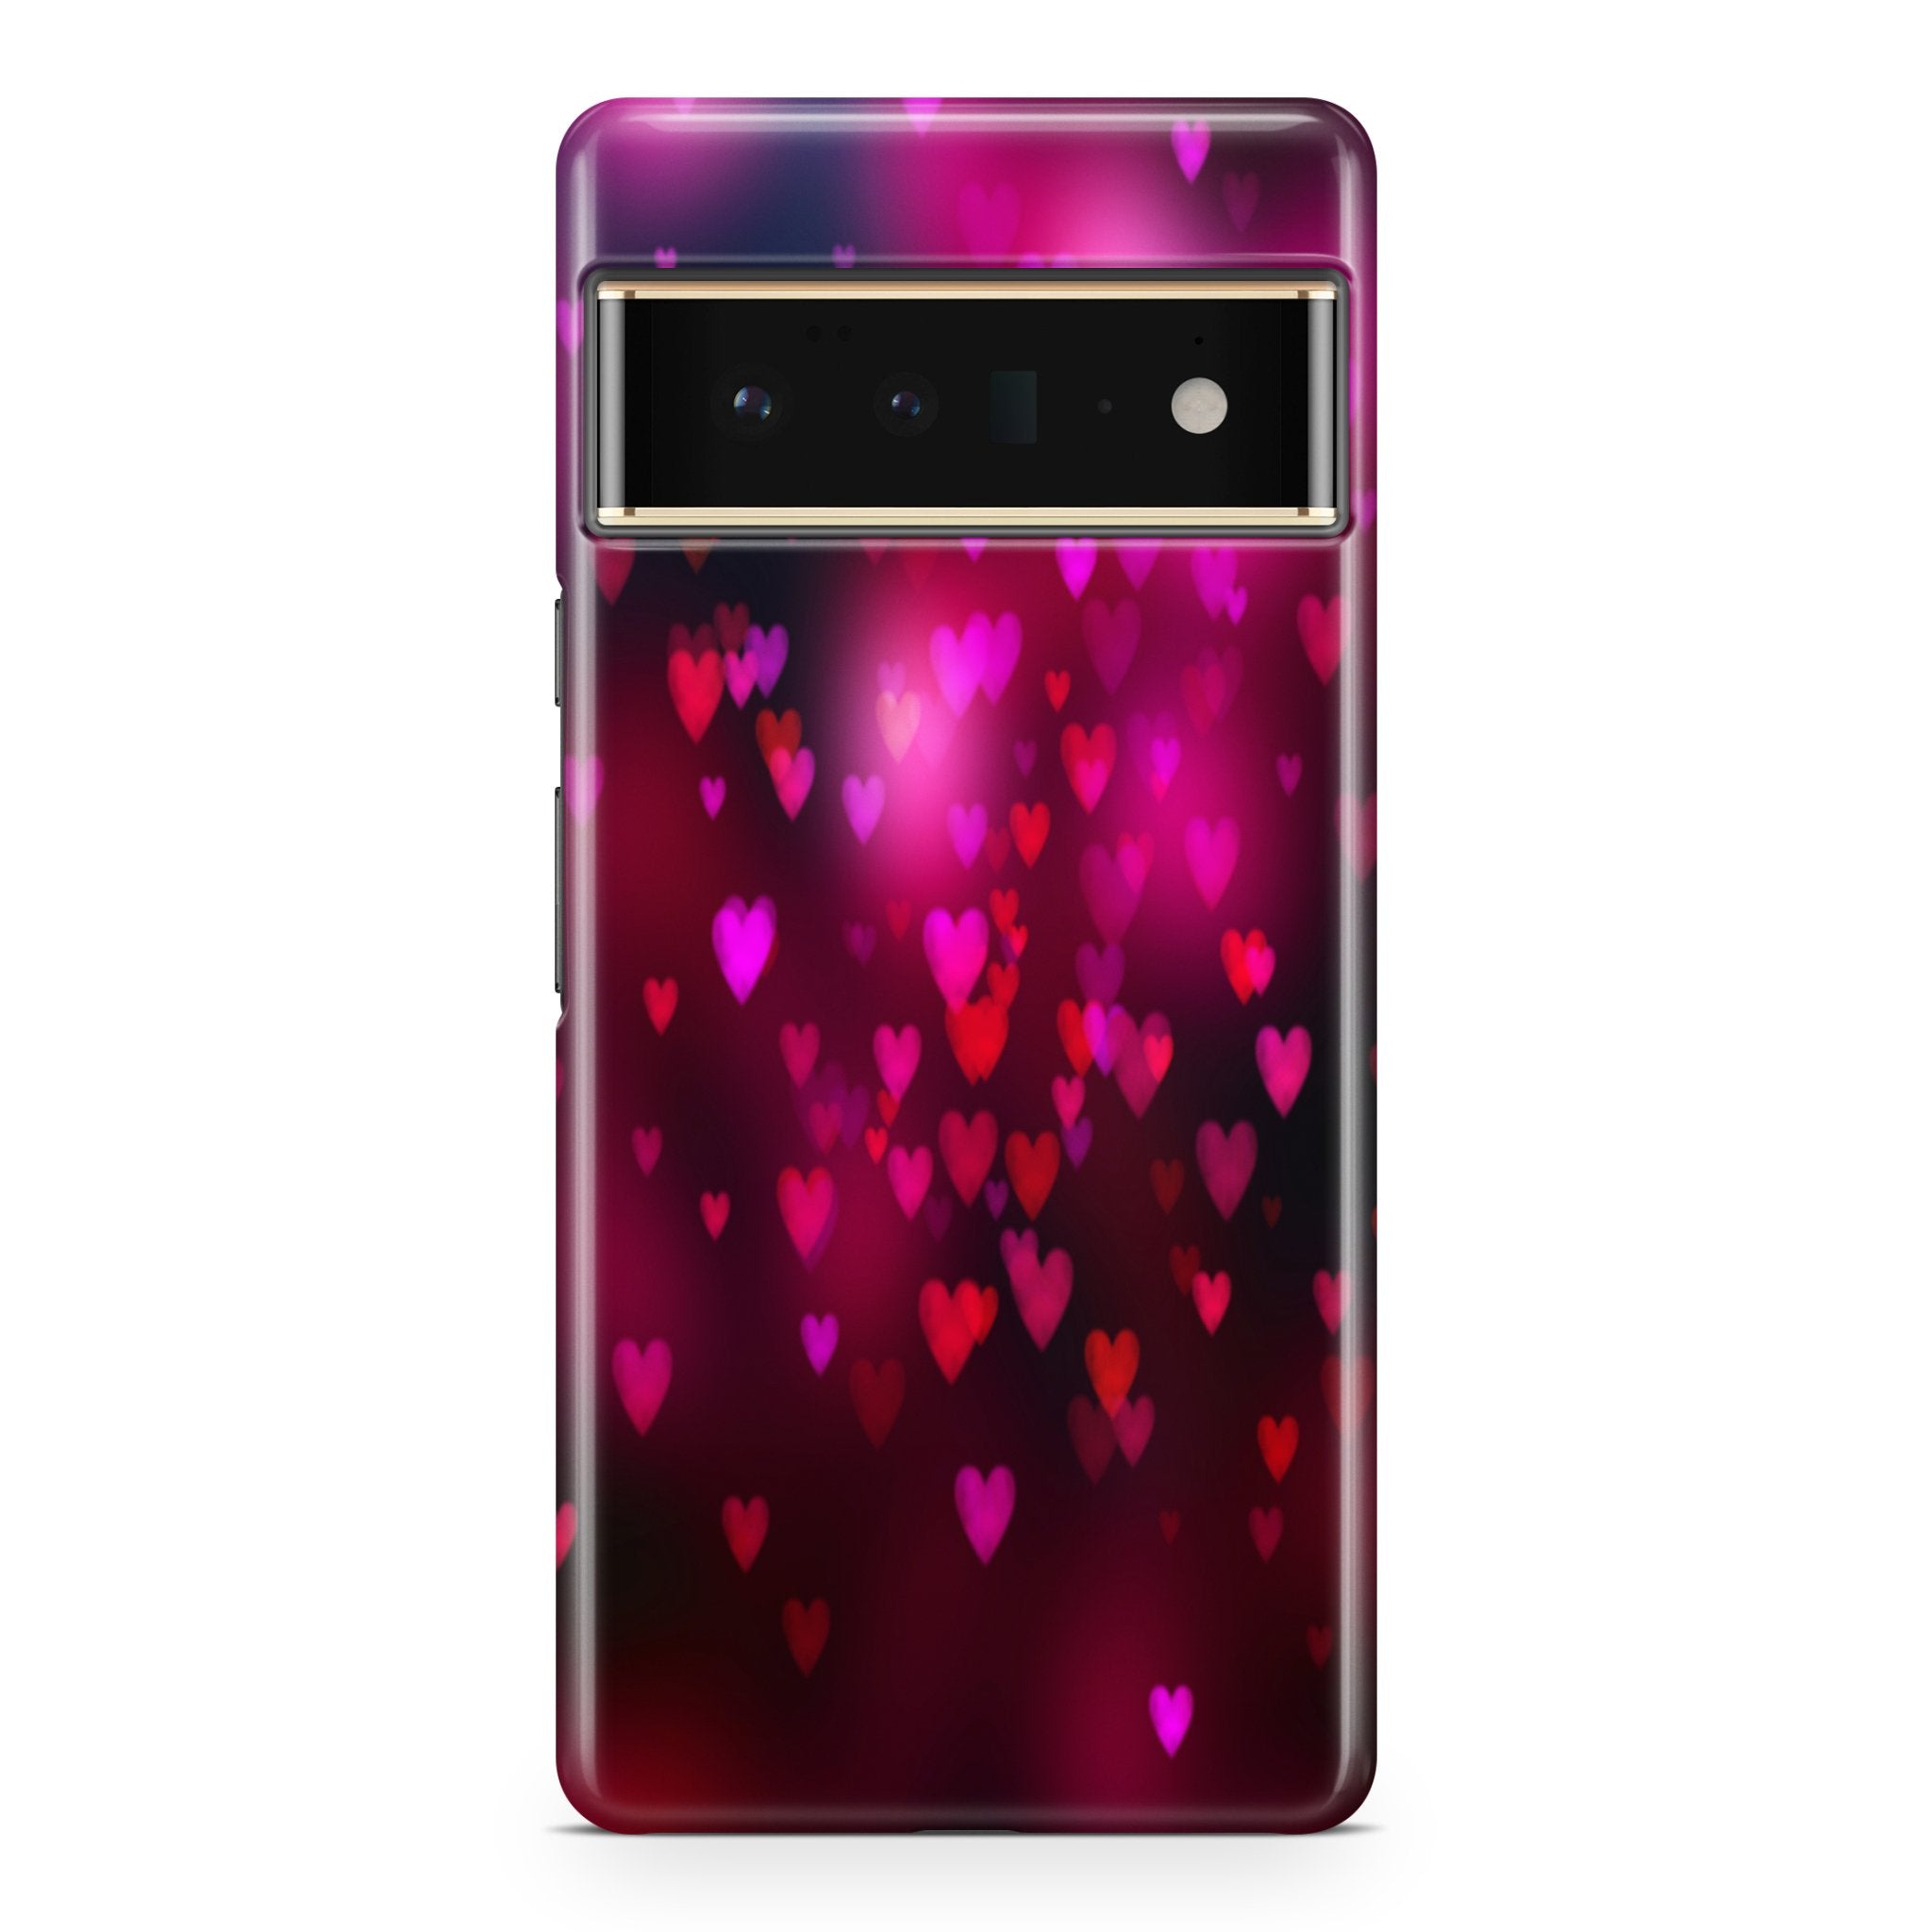 Valentine Series I - Google phone case designs by CaseSwagger